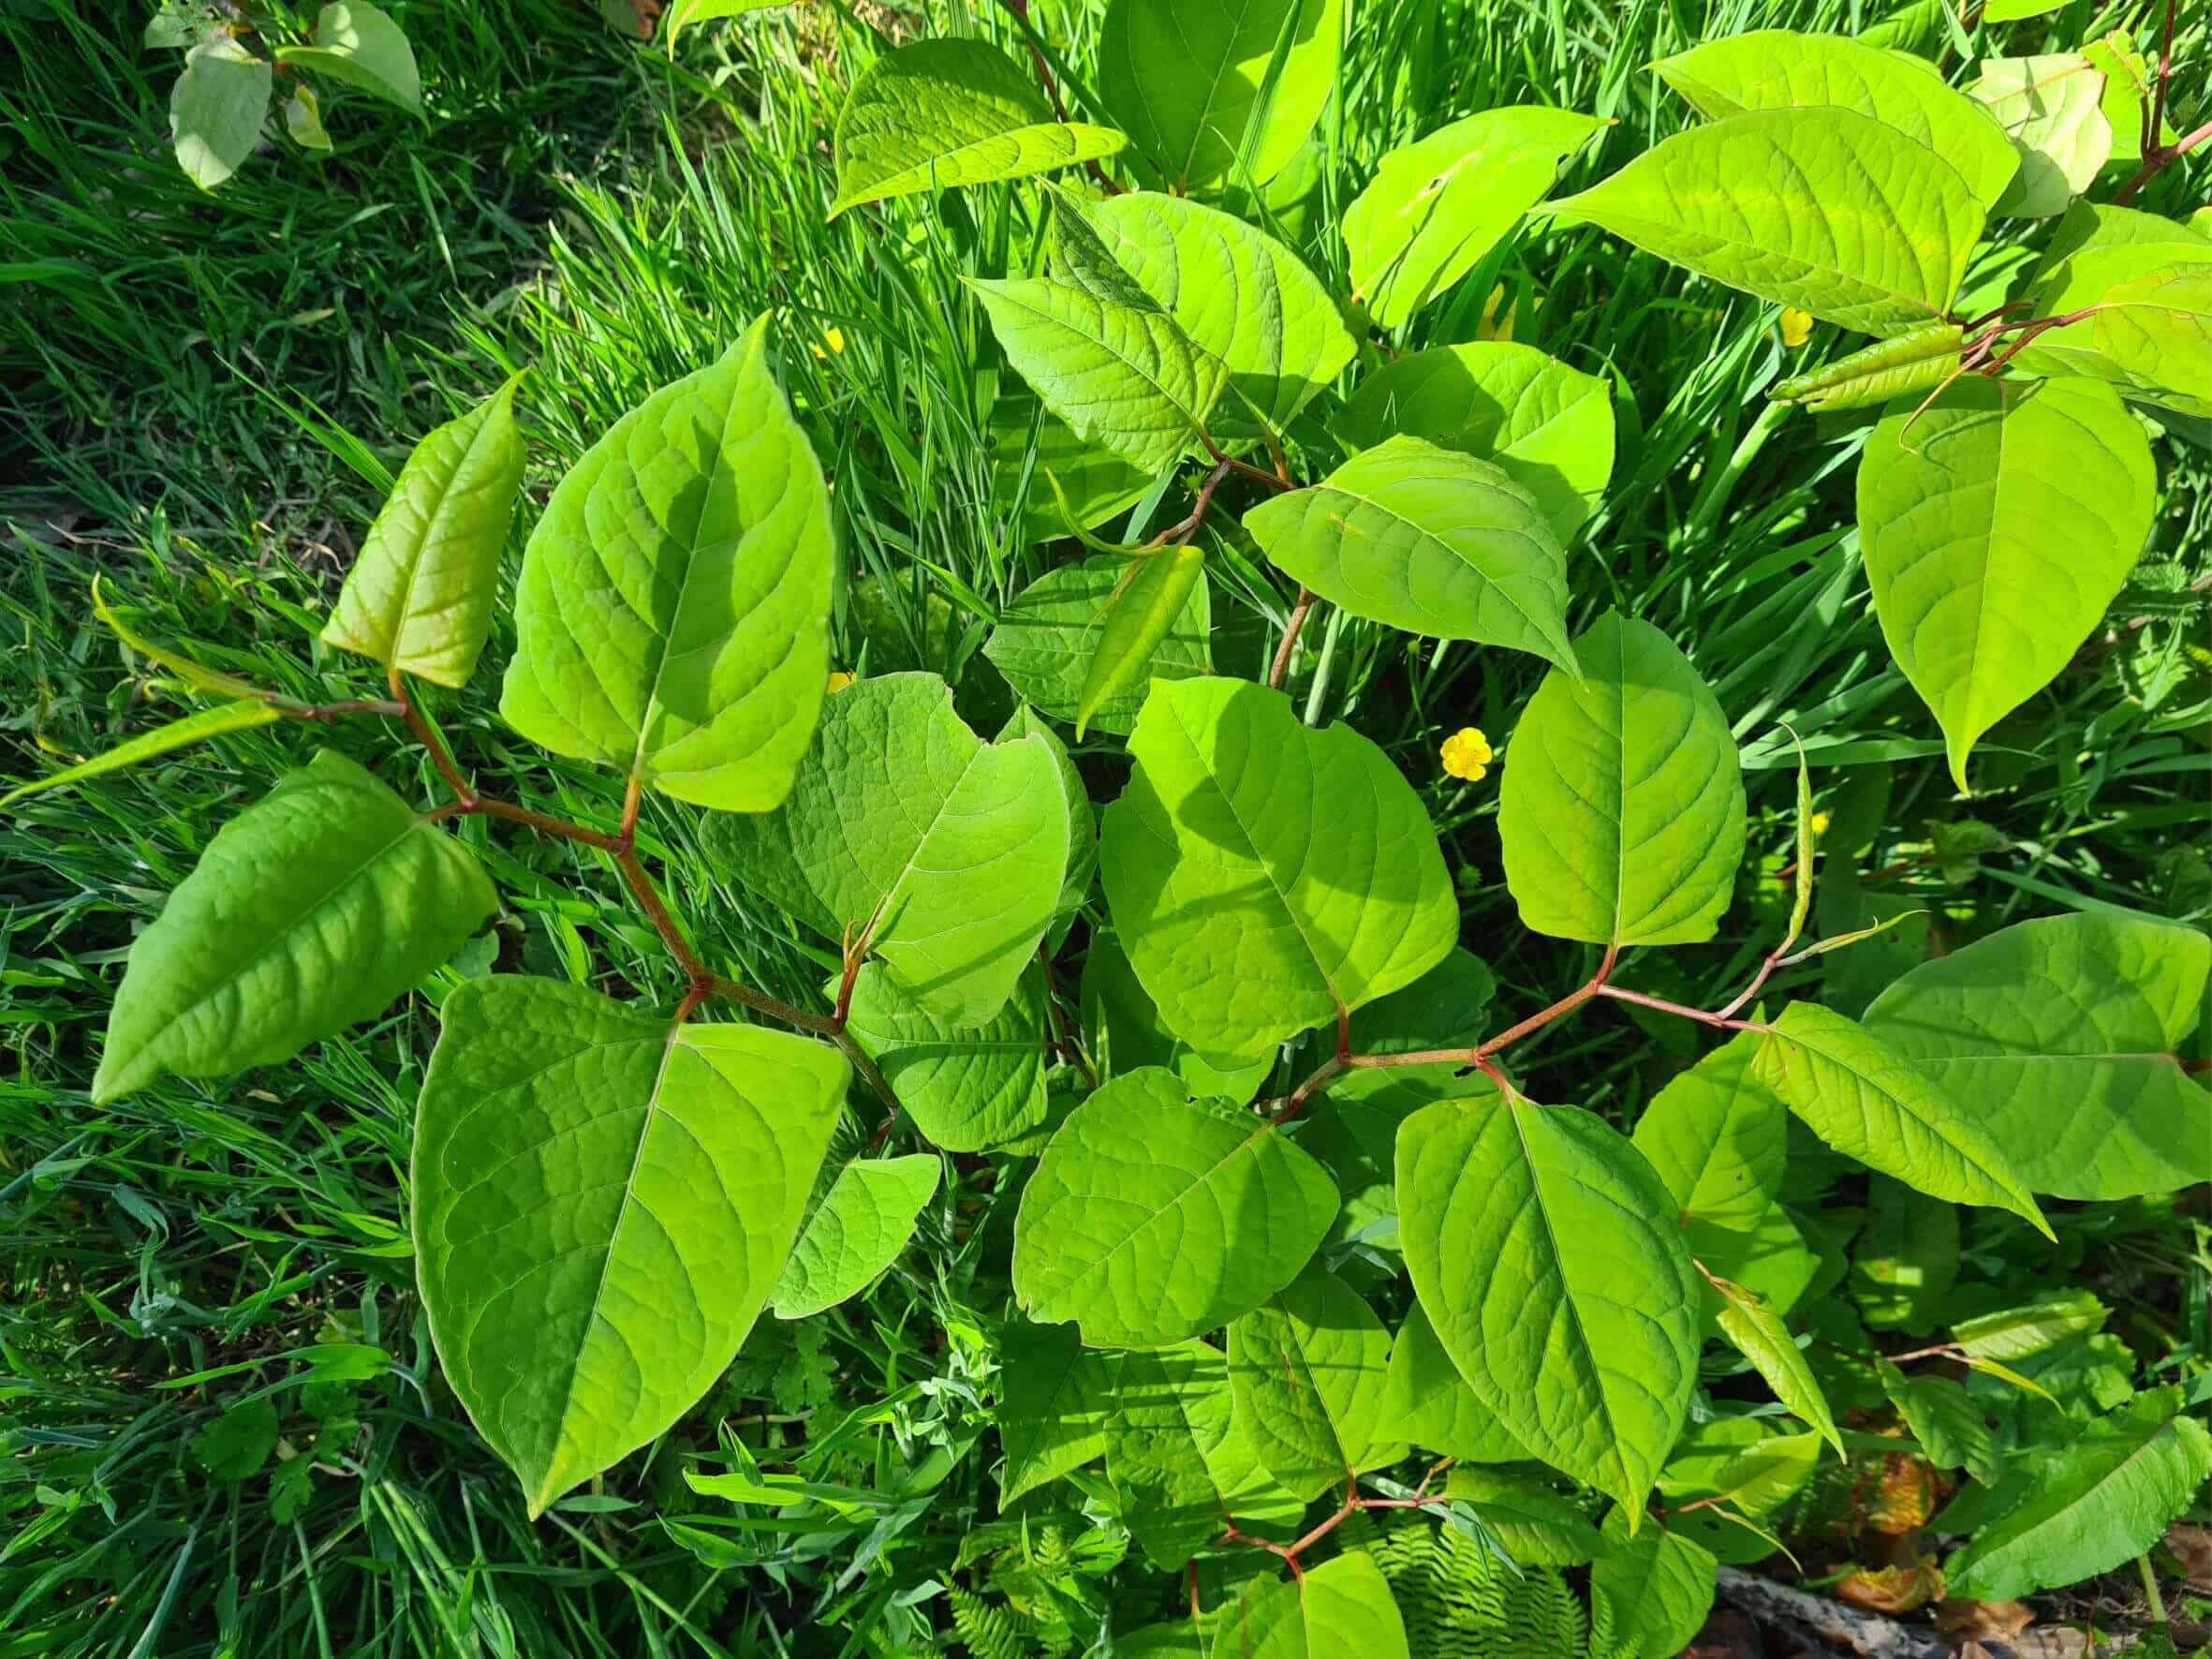 Japanese Knotweed leaves in Summer - clustered and growing